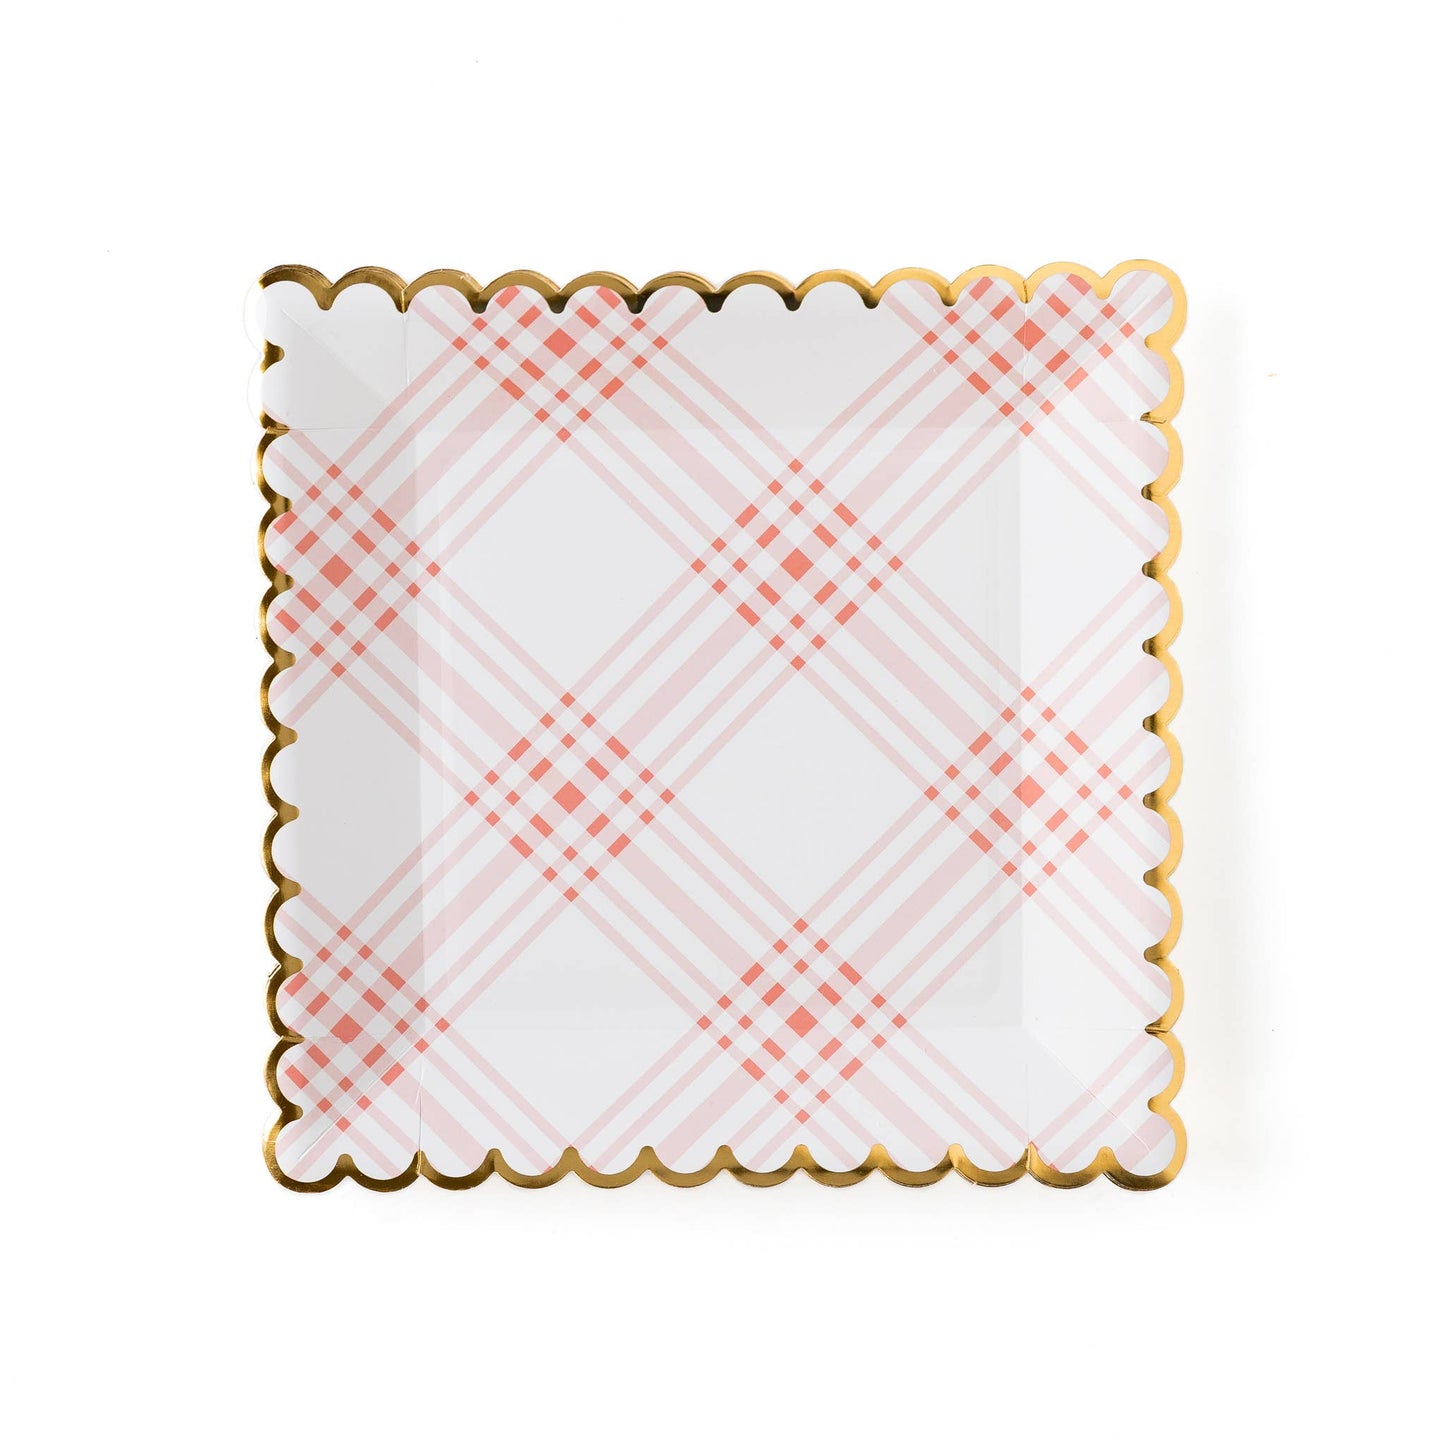 Garden Party Pink Scalloped Plaid Plate